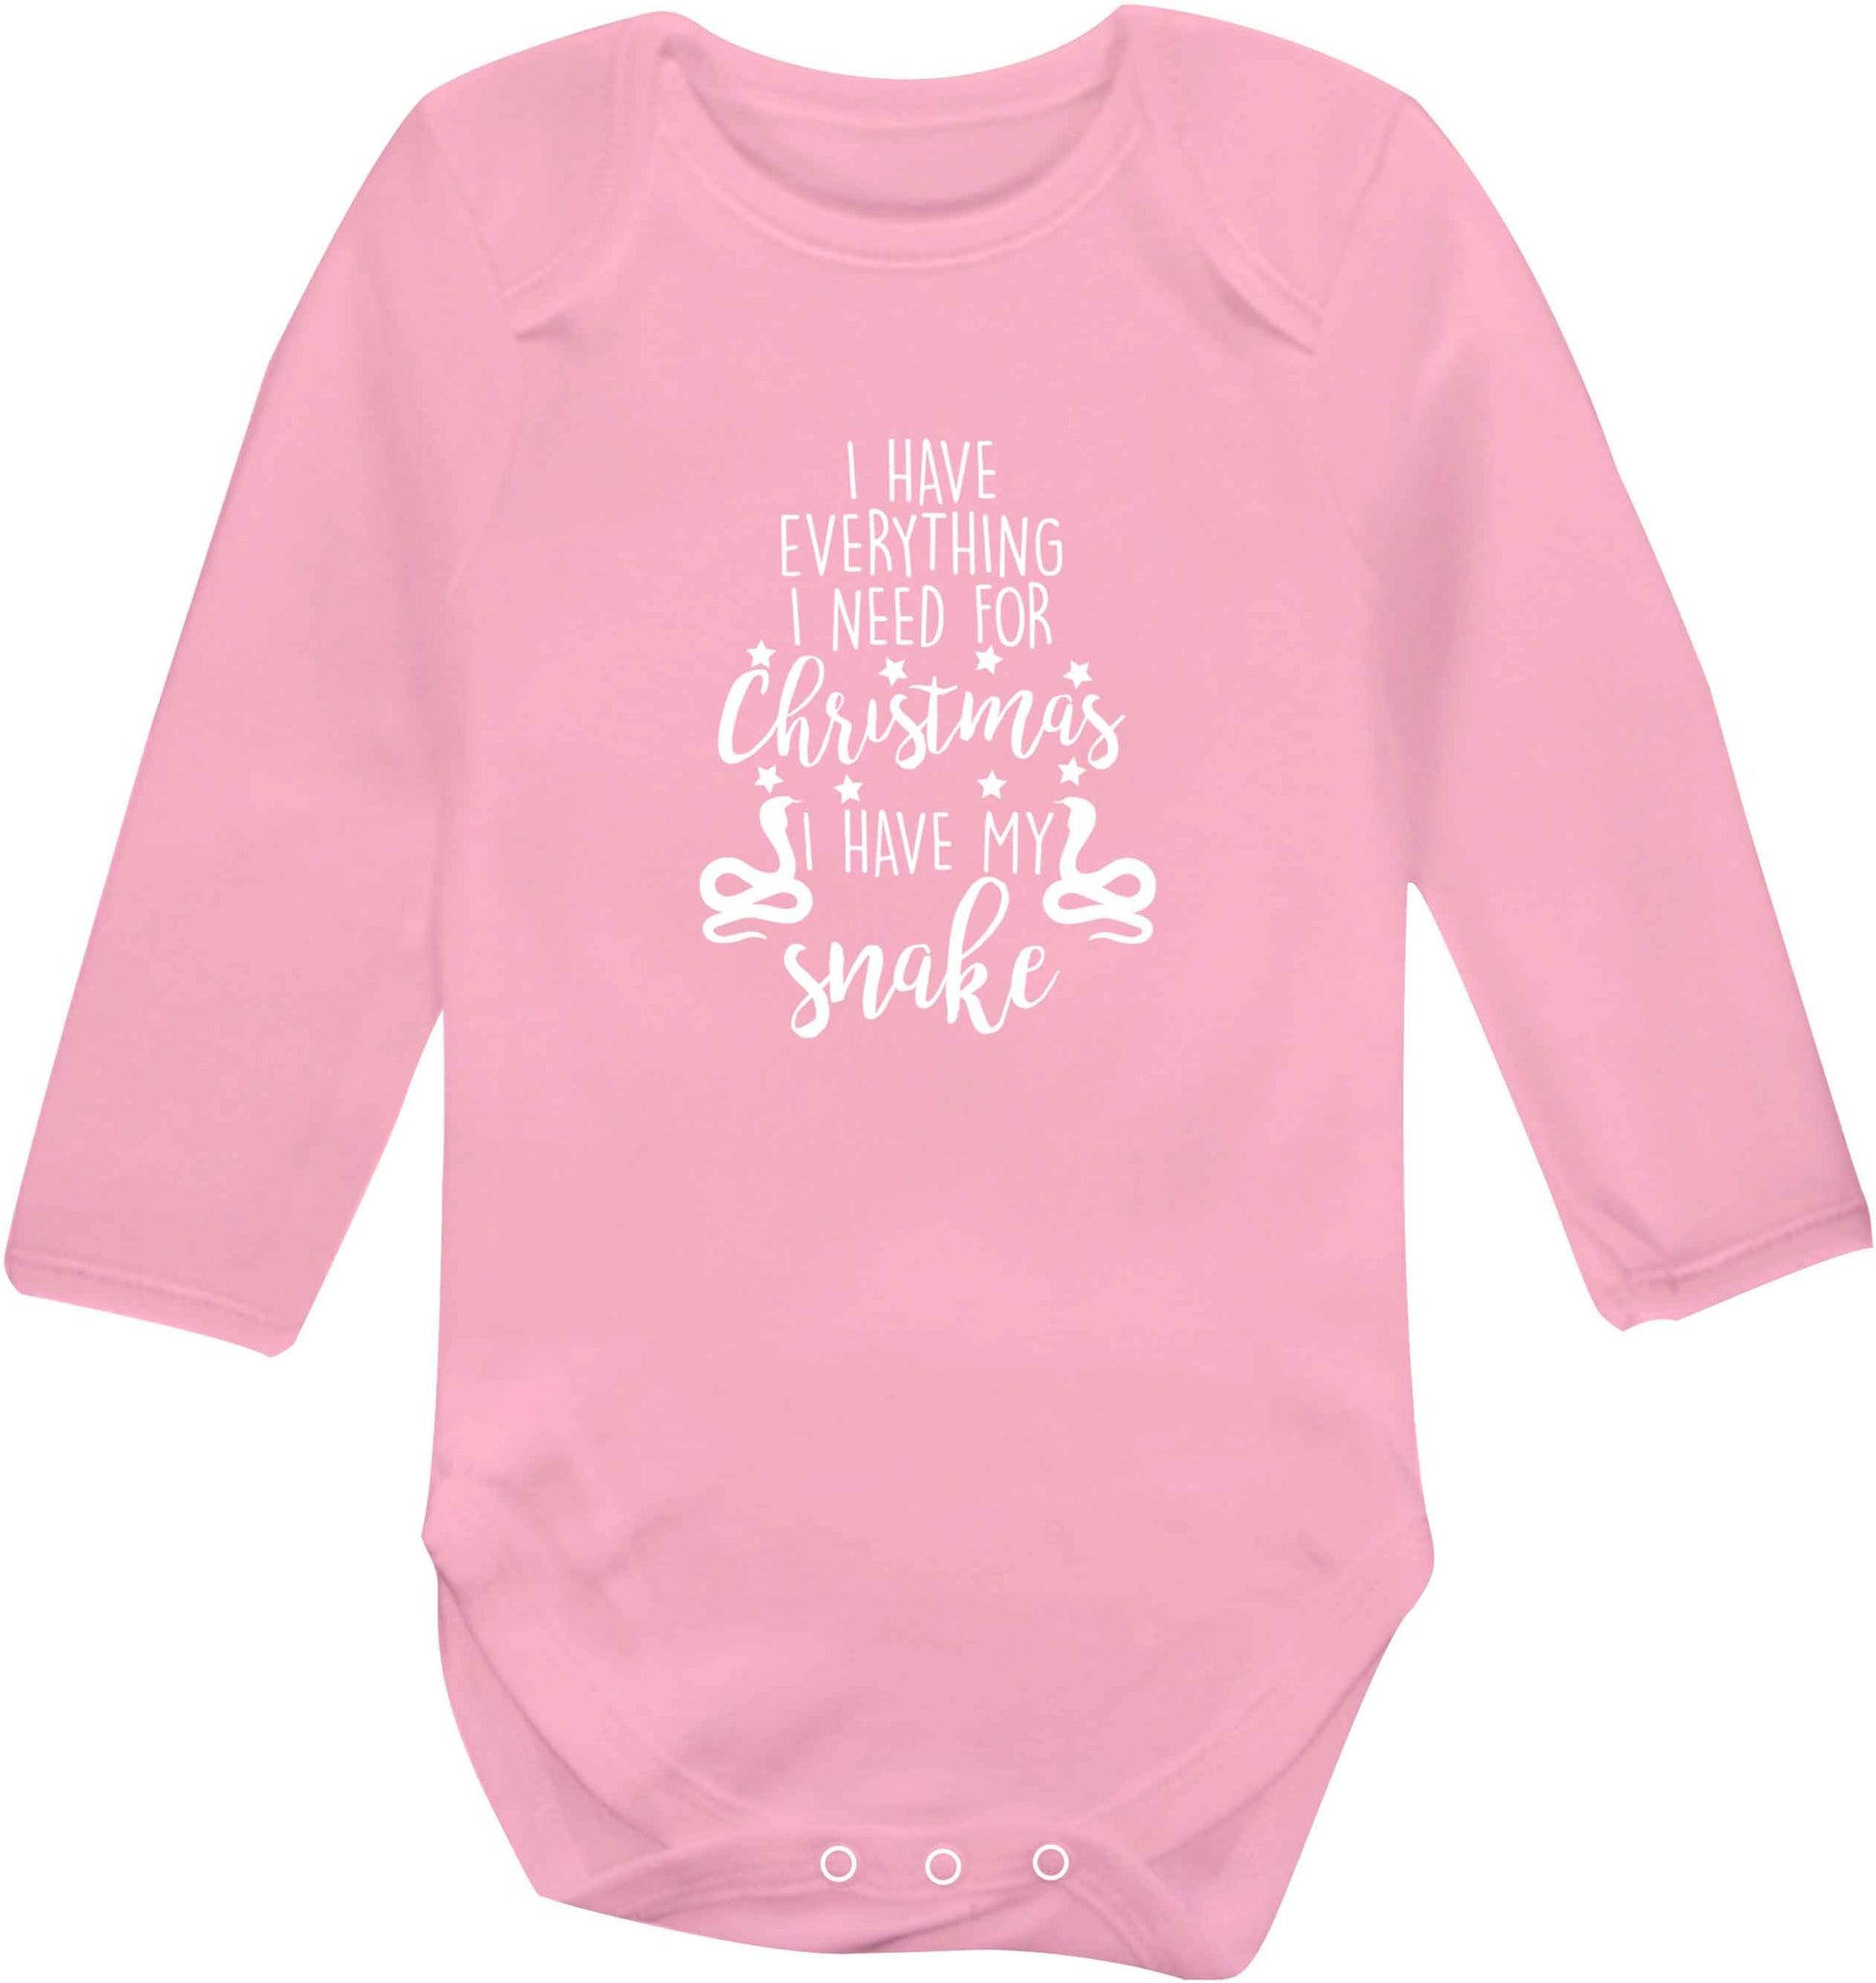 I have everything I need for Christmas I have my snake baby vest long sleeved pale pink 6-12 months